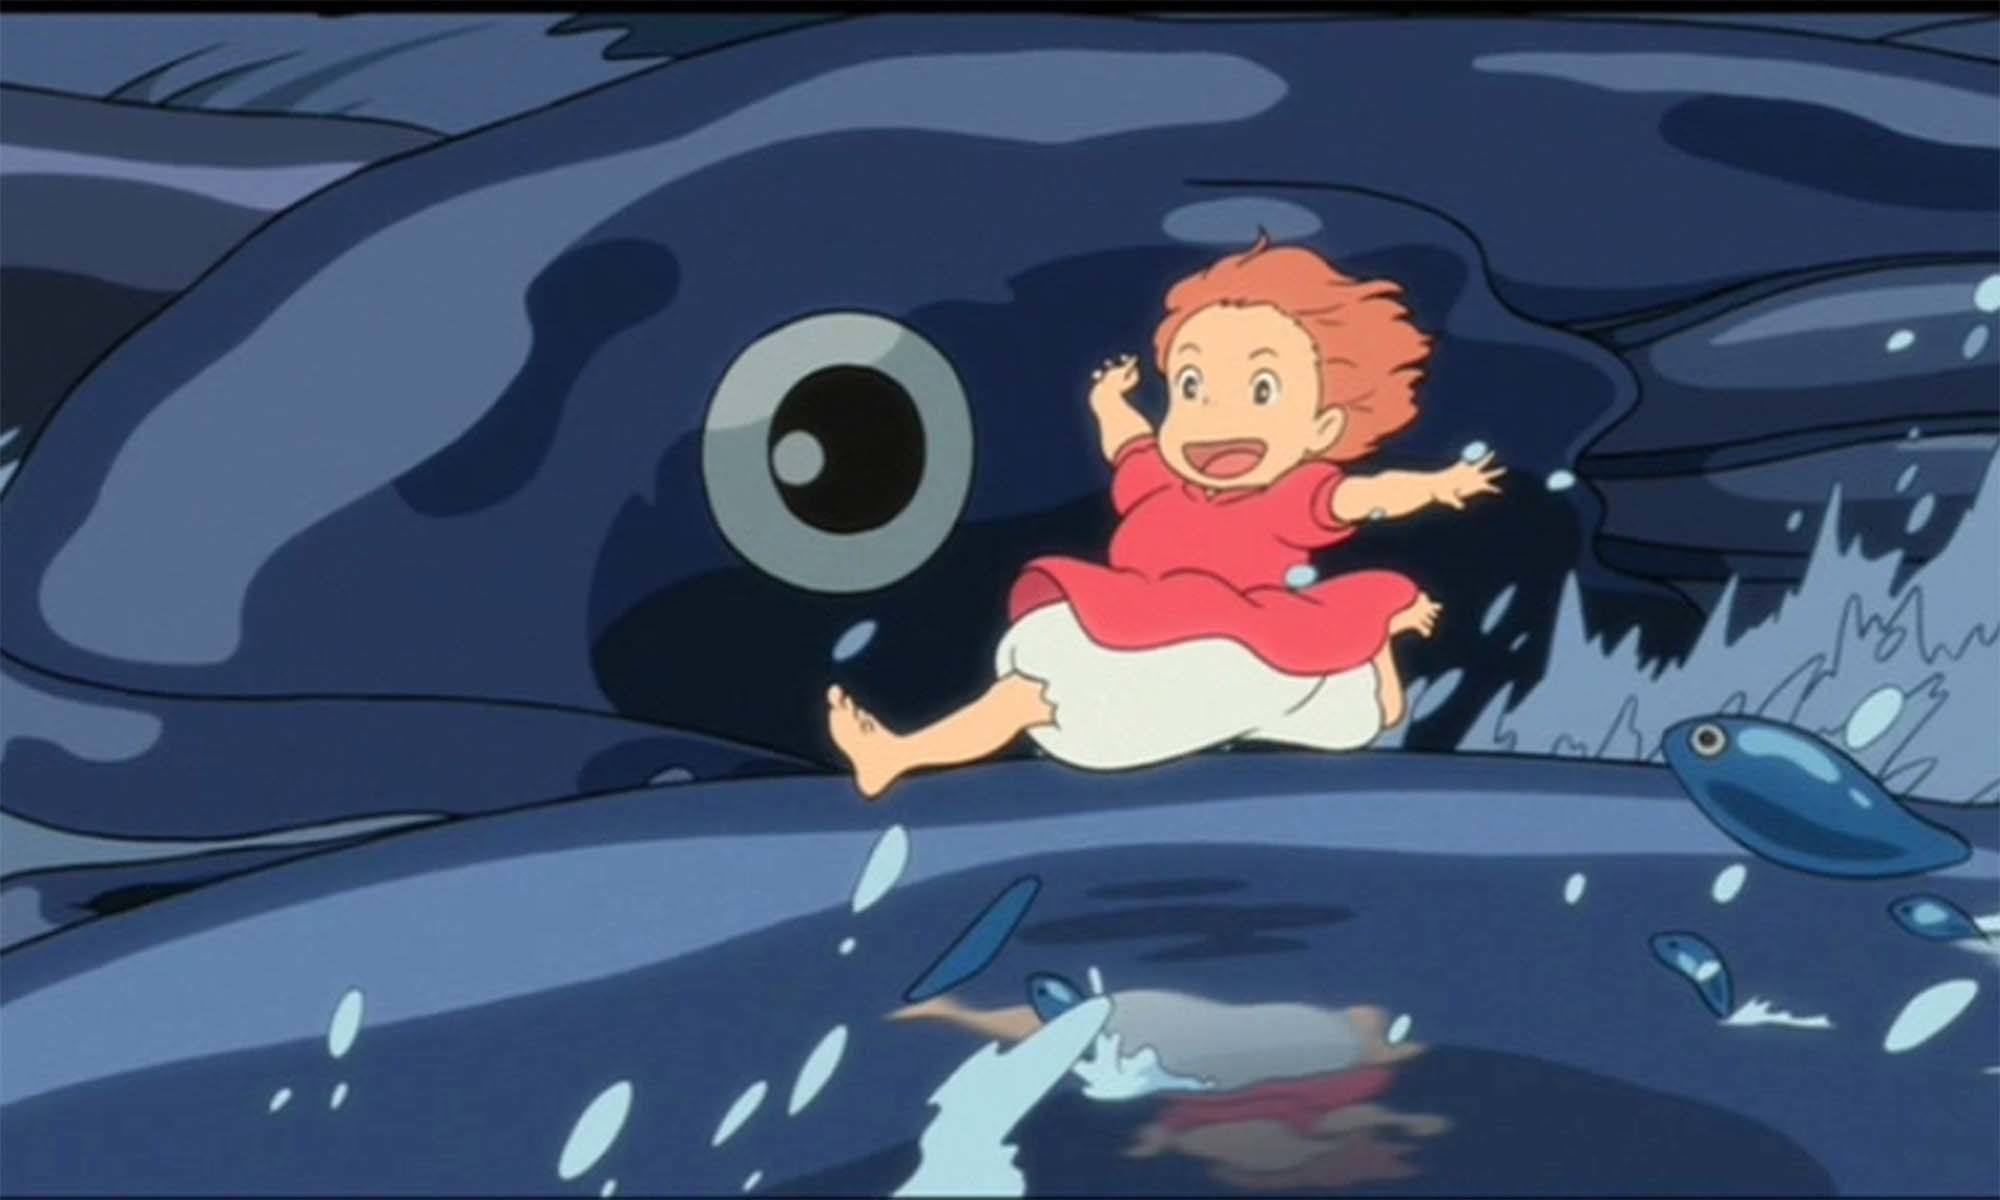 554000 1920x1080 ponyo  Wallpaper Collection JPG 506 kB  Rare Gallery HD  Wallpapers